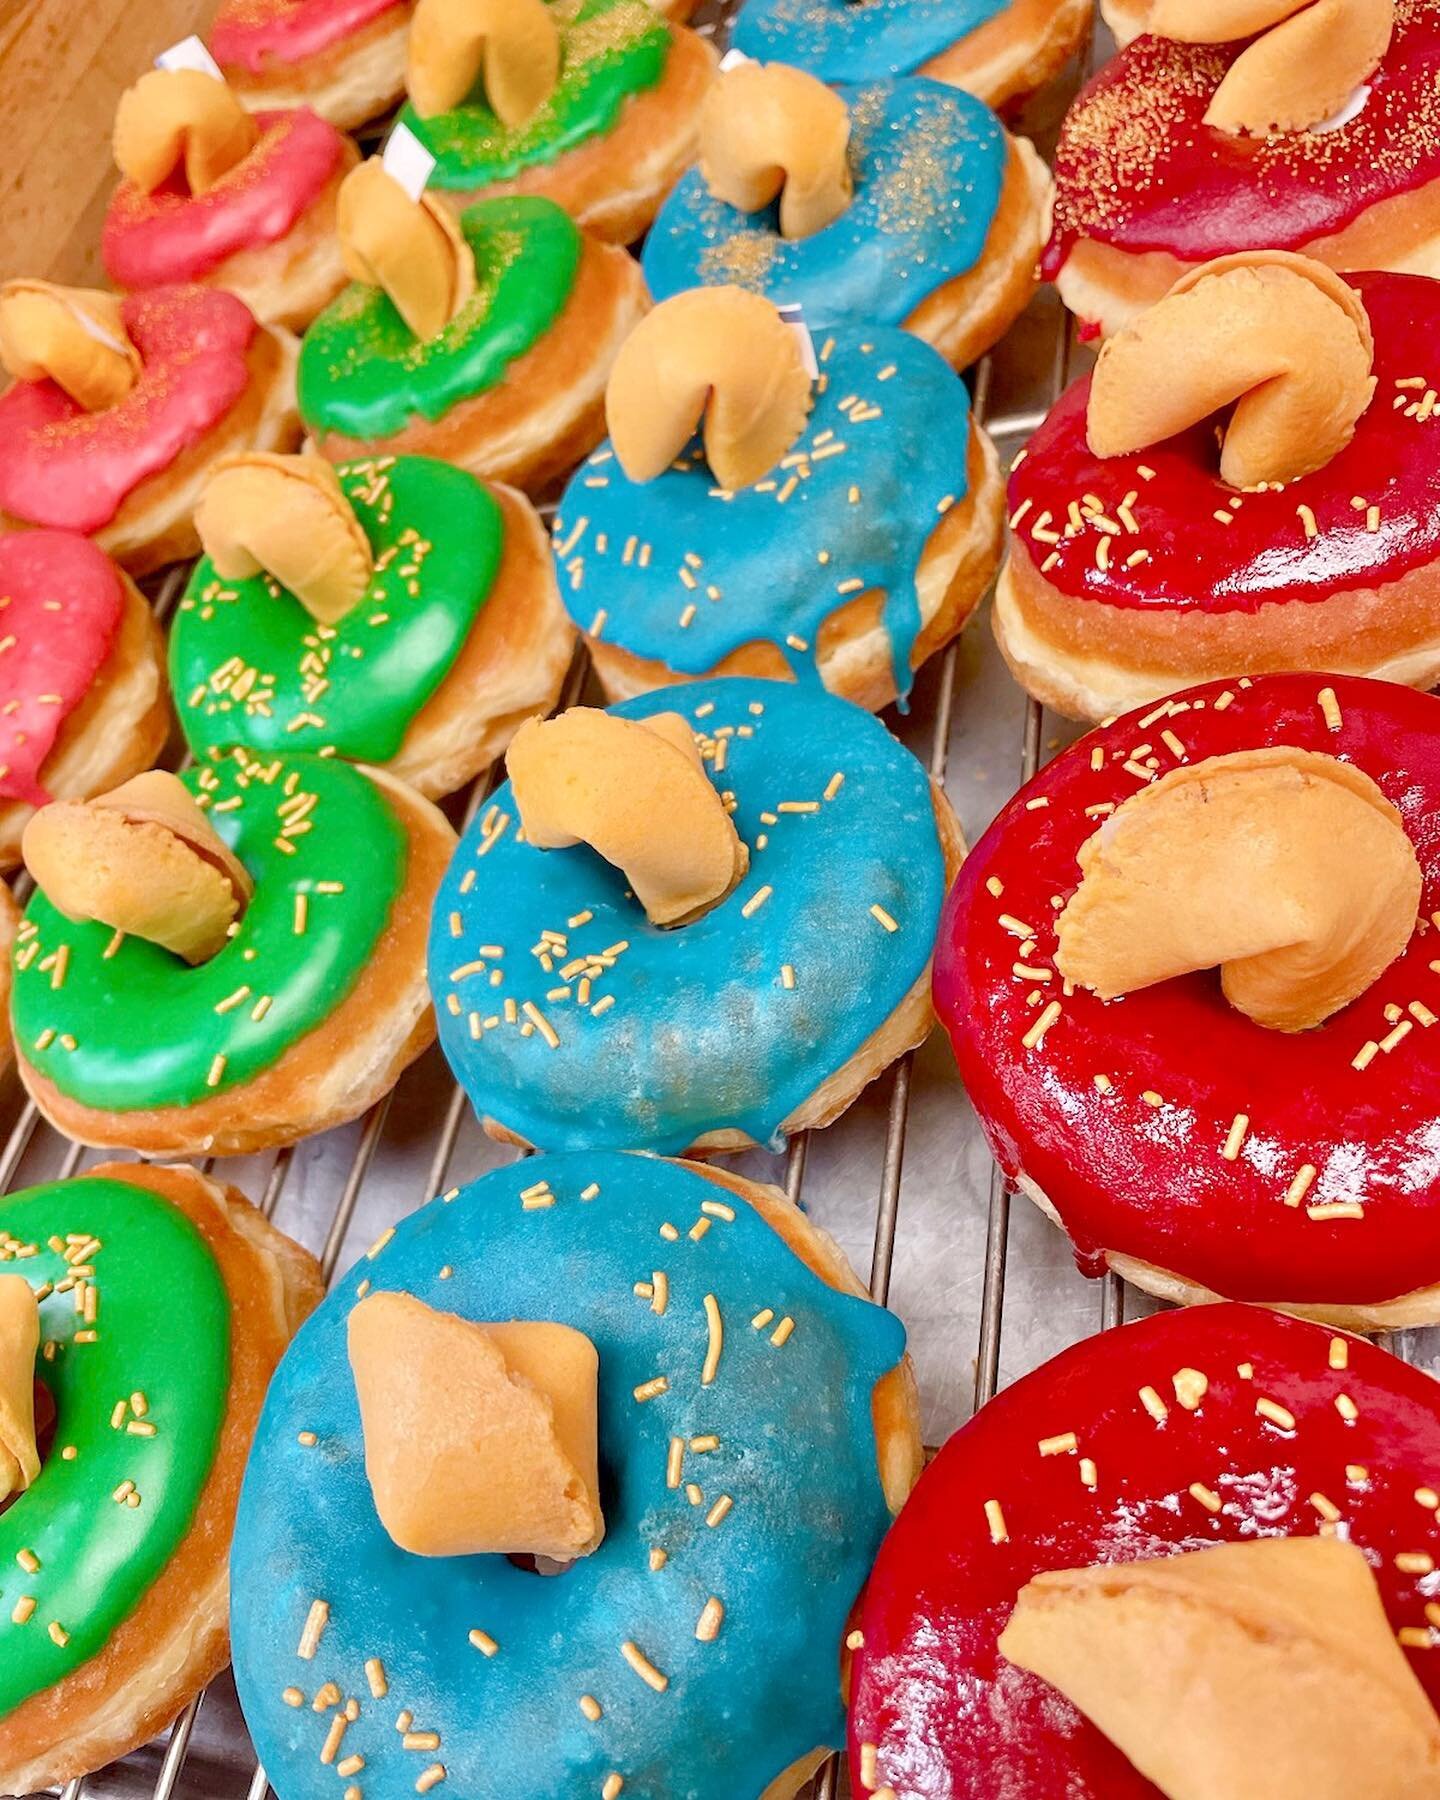 HAPPY LUNAR NEW YEARS! 🧧 Wishing all wealth, health, happiness, and abundance of donuts! Come pick up your Good Luck Fortune Donut today! 🥠🧧❤️